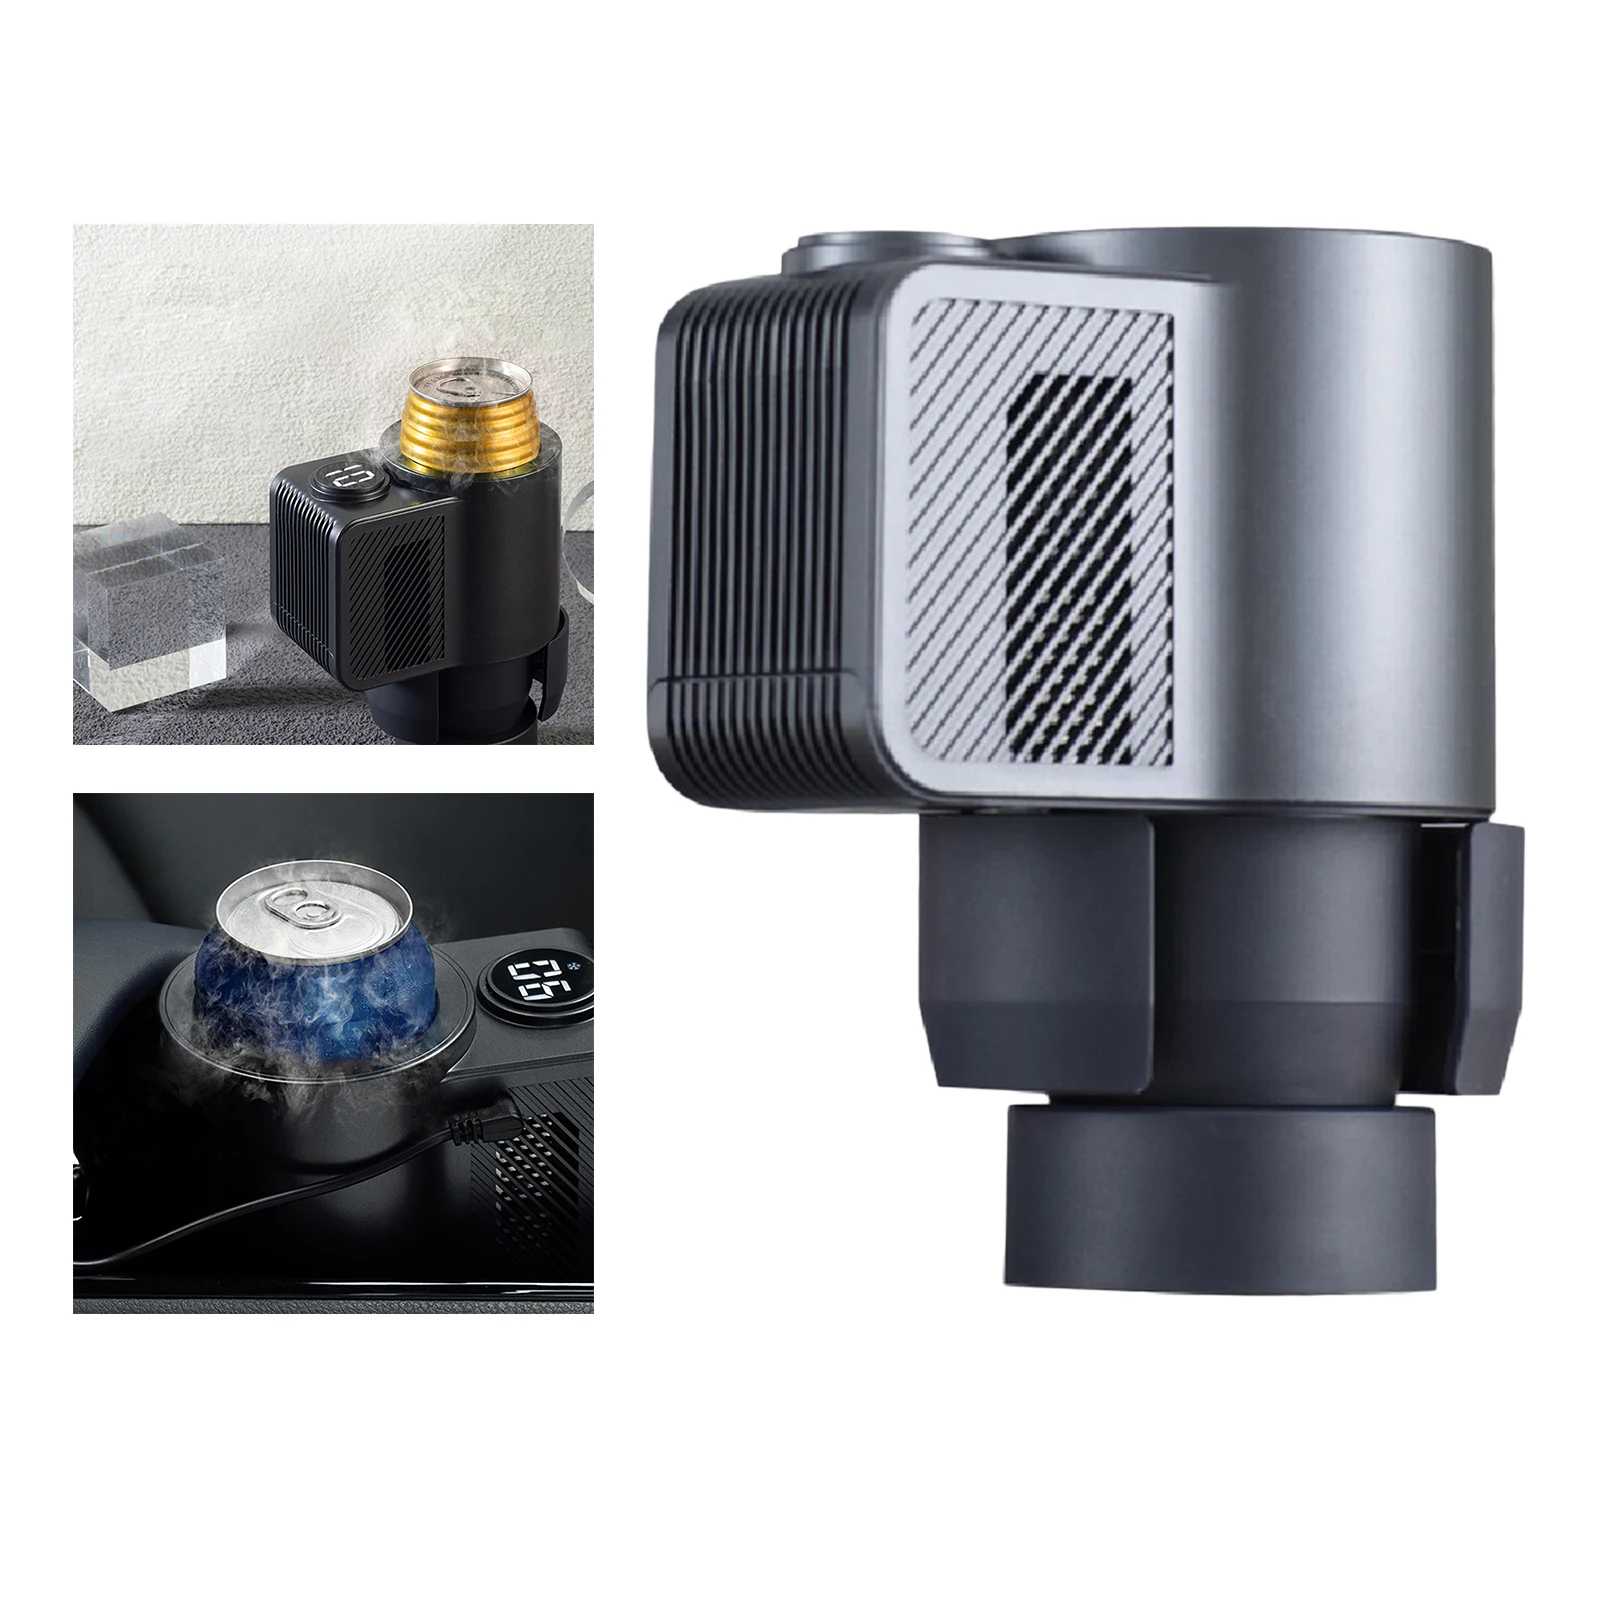 2 In 1 Car Cup Cooler Warmer Auto Cooling and Heating Cup Holder for Water Coffee Beverage Milk Heater Cooler